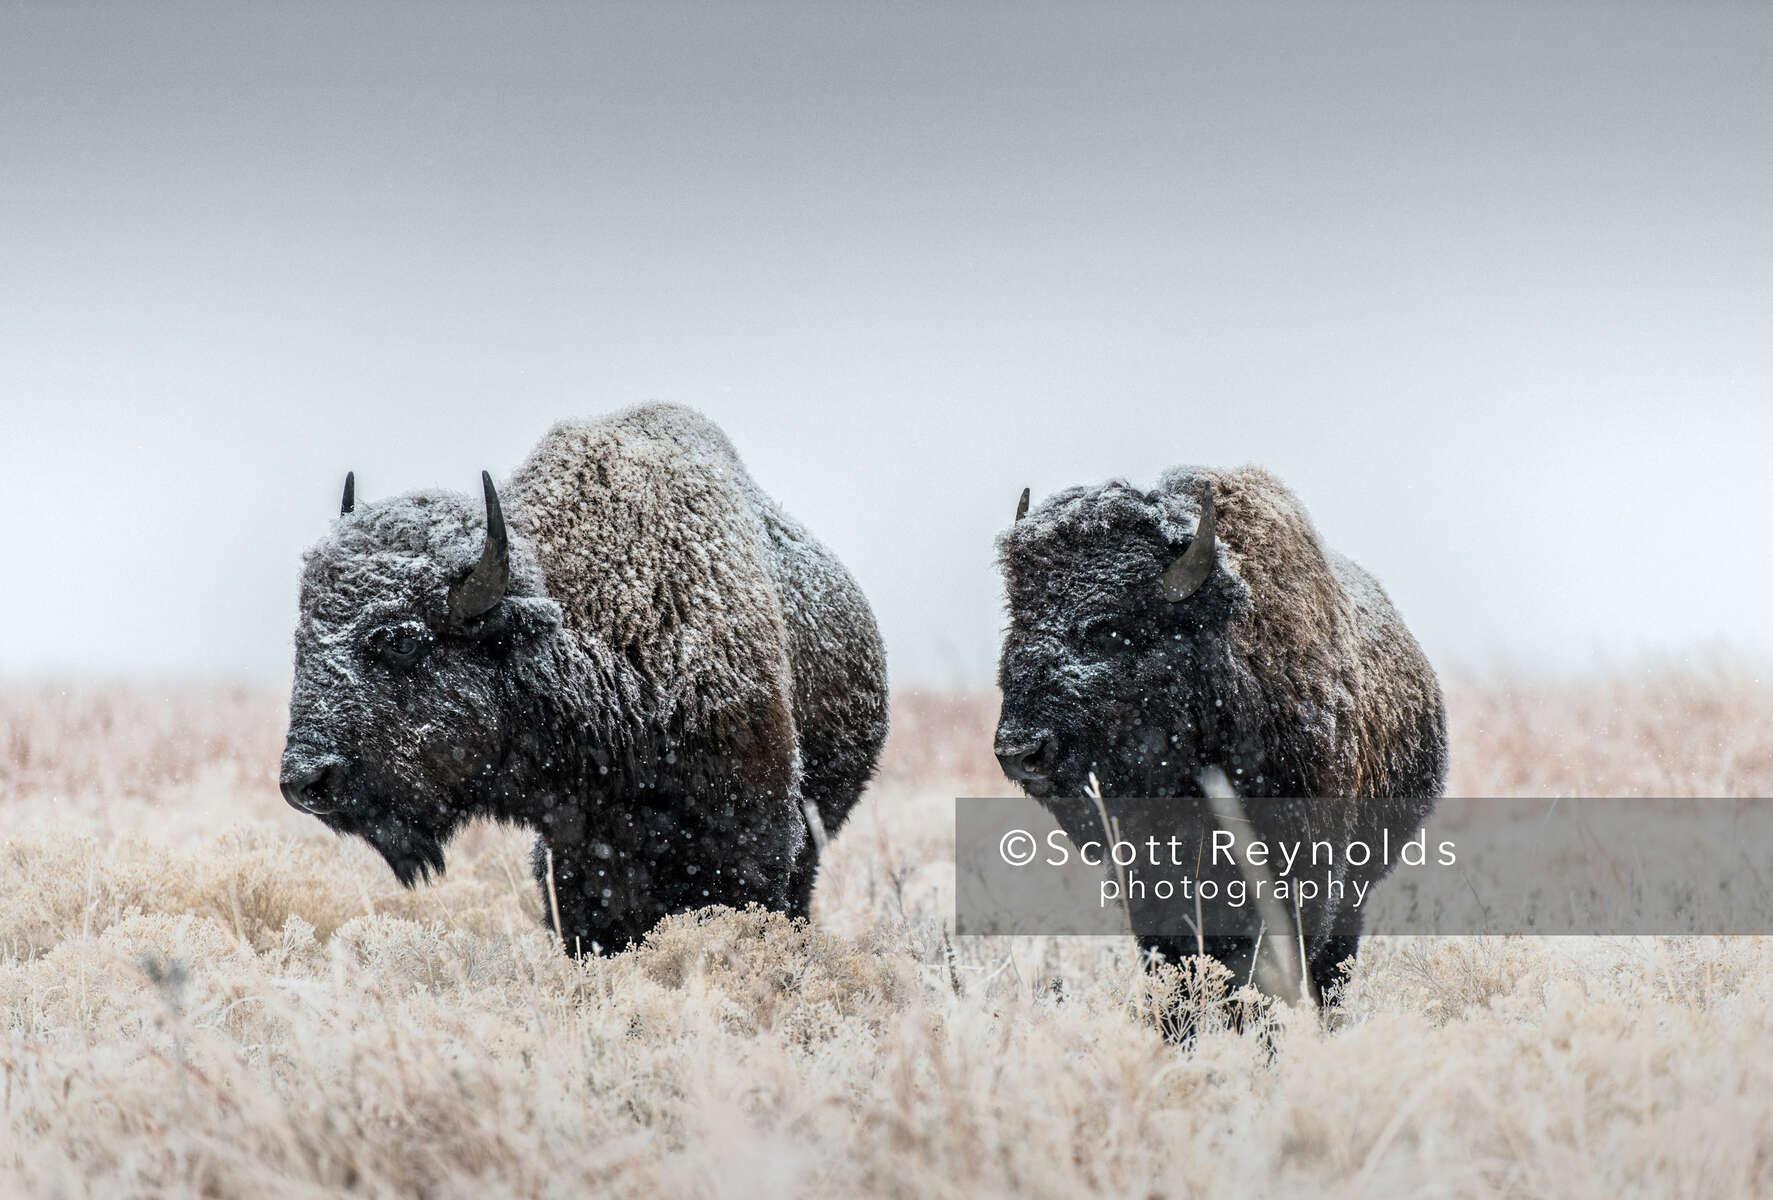 Photographing BisonI captured both of these photographs at the Tallgrass Prairie National Preserve in the Flint Hills of Kansas on separate visits. The preserve is a window into what the great plains were once like, and hosts a herd of over 100 bison. I deliberately photograph them during snow storms as it helps me appreciate the way they handle environmental extremes and winter allows me to showcase their full coats before any shedding occurs in warmer weather. Hiking into the preserve and finding the herd roaming freely is always a bit surreal, as they are an intimidating presence to encounter. Time seems to slow down on shoot days as I follow their grazing patterns through the Windmill Pasture during snowfall.